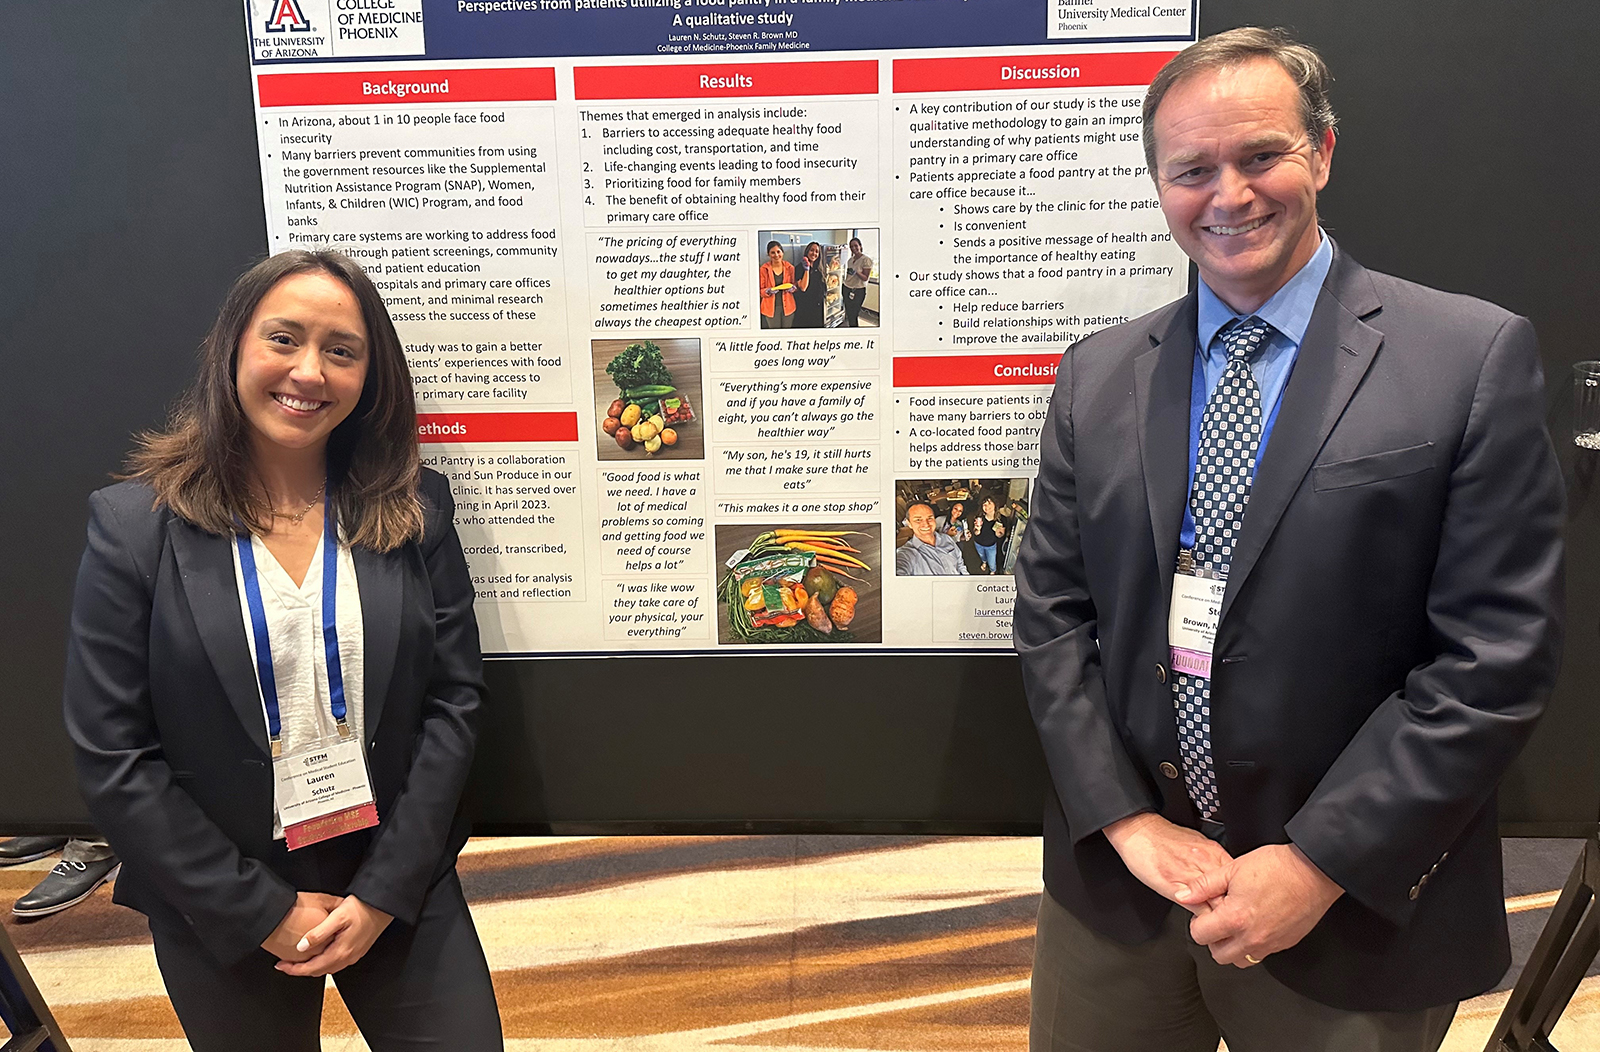 Lauren Schutz, along with Steven Brown, MD, at the 2024 STFM Conference on Medical Student Education in Atlanta, Georgia